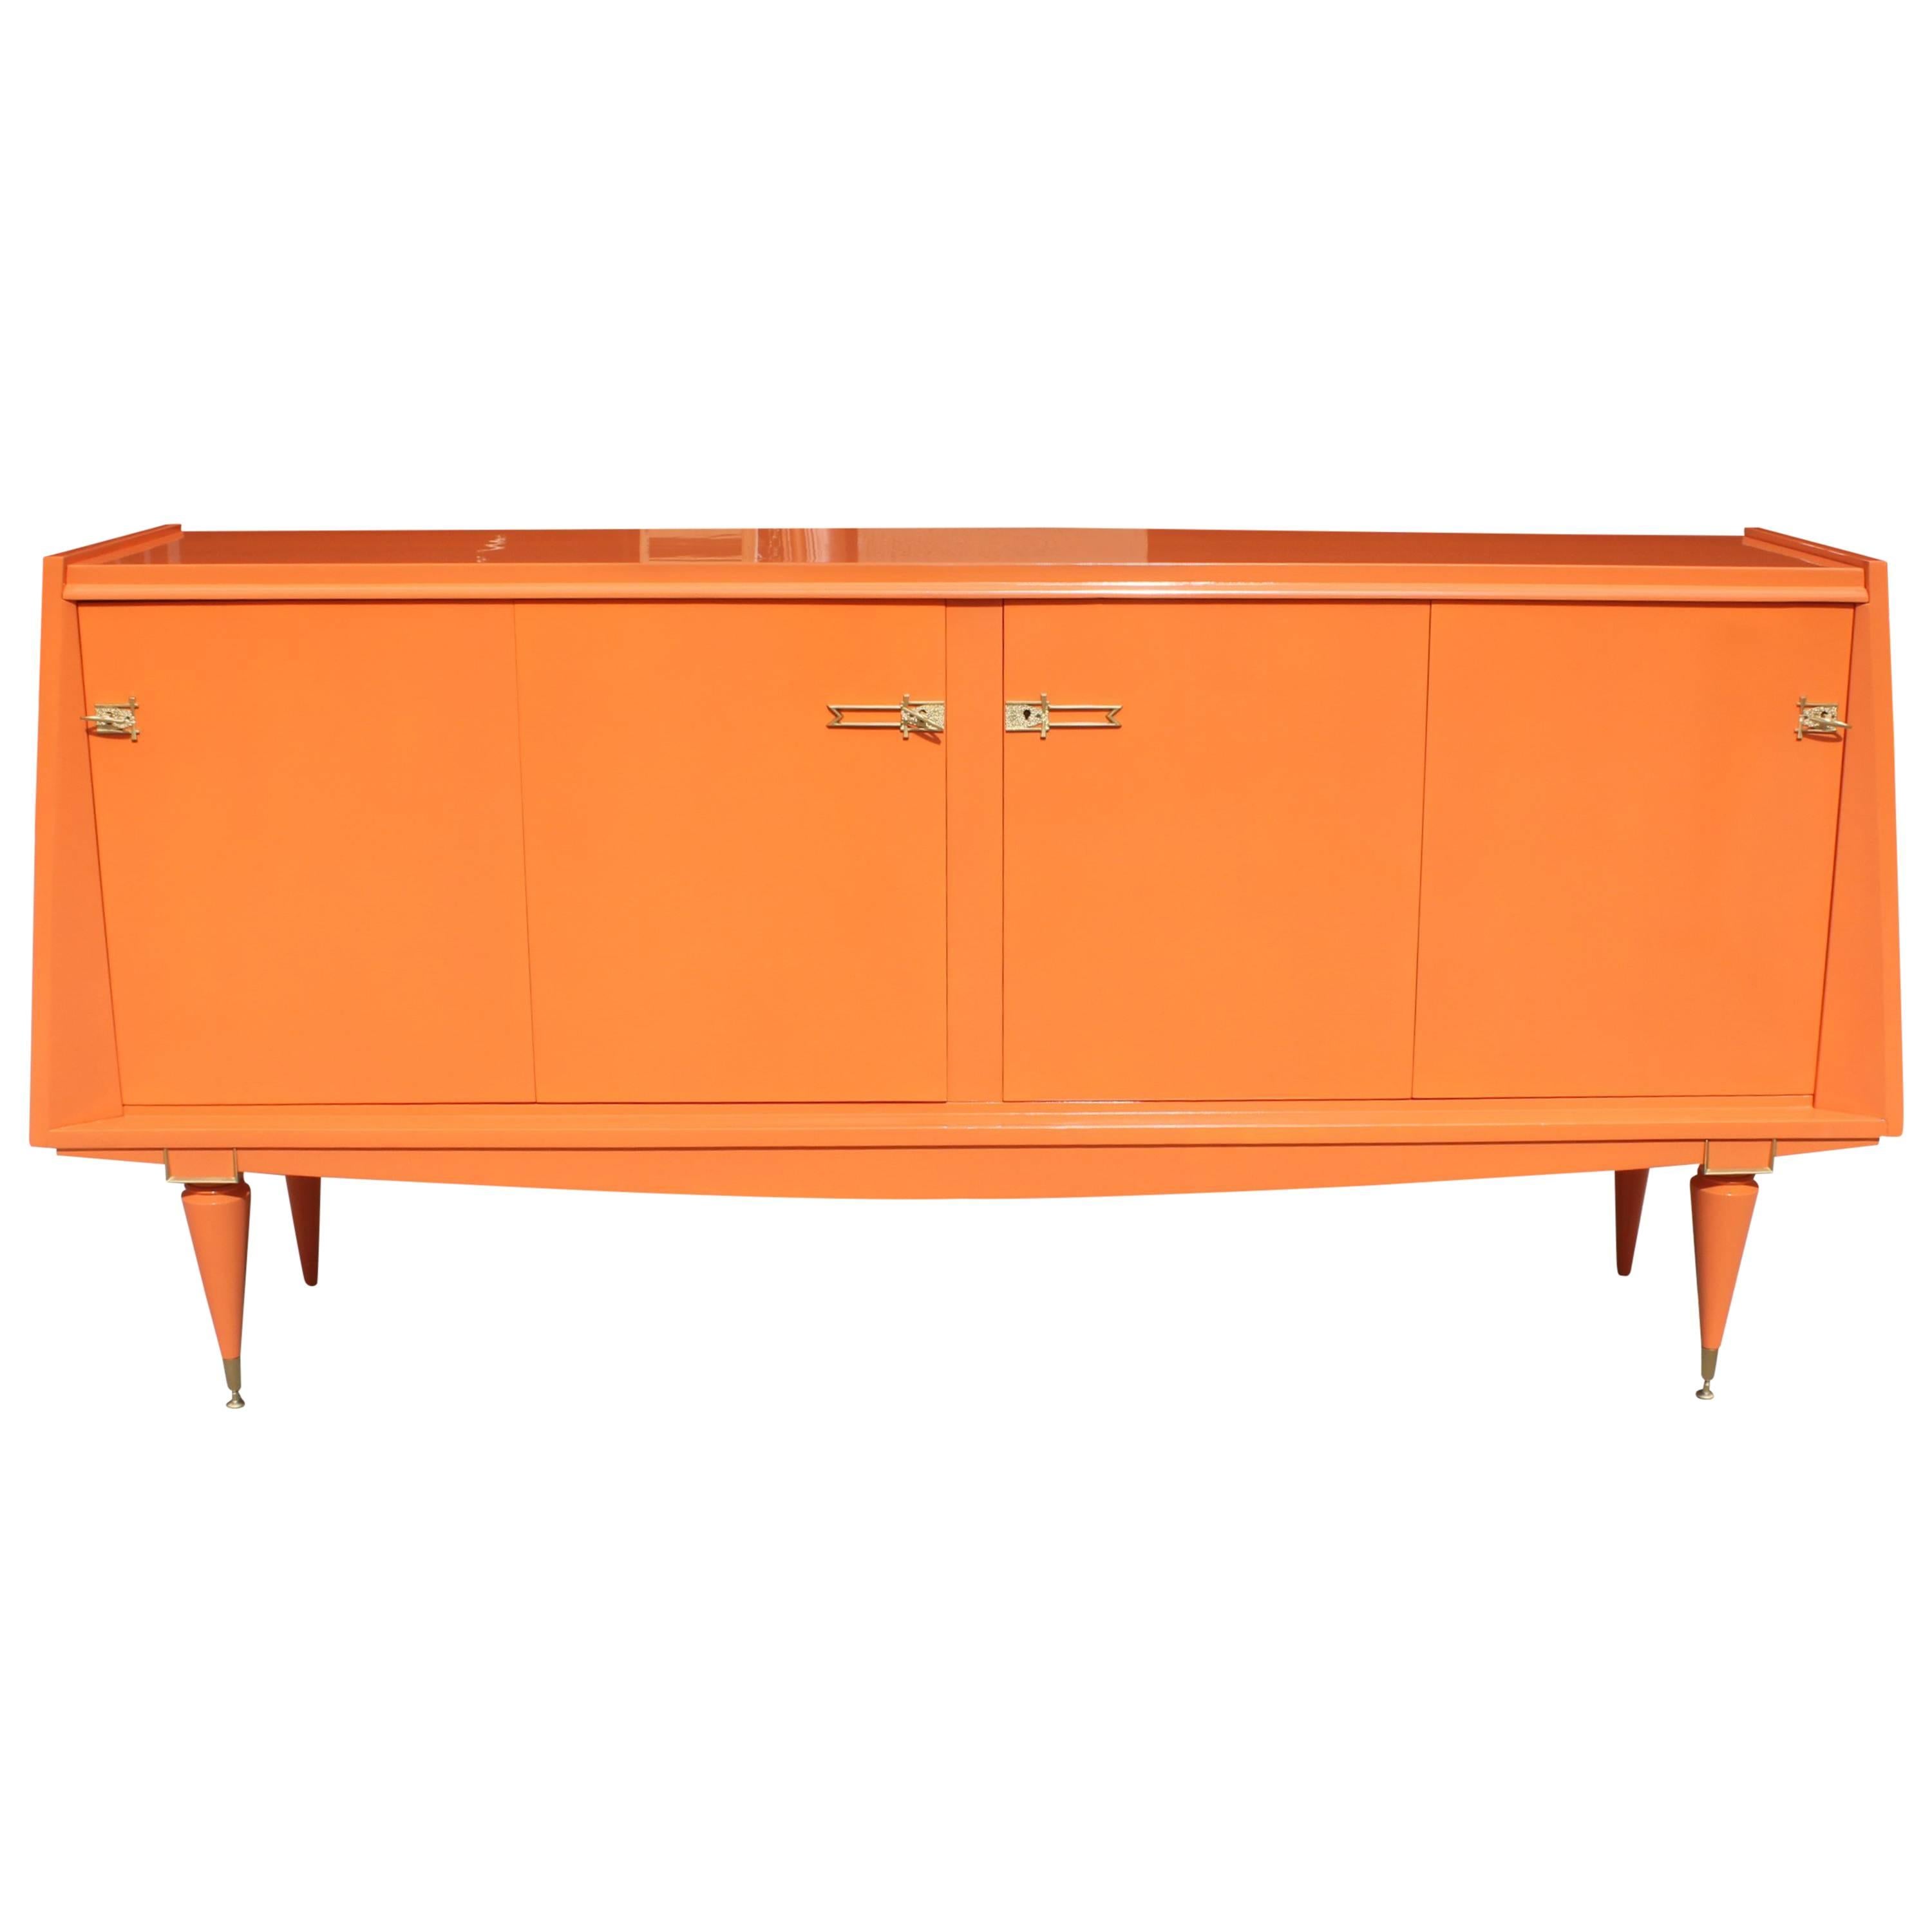  Pyramid Style Art Deco Art Modern Sideboard or Buffet "Hermes" Orange Lacquered